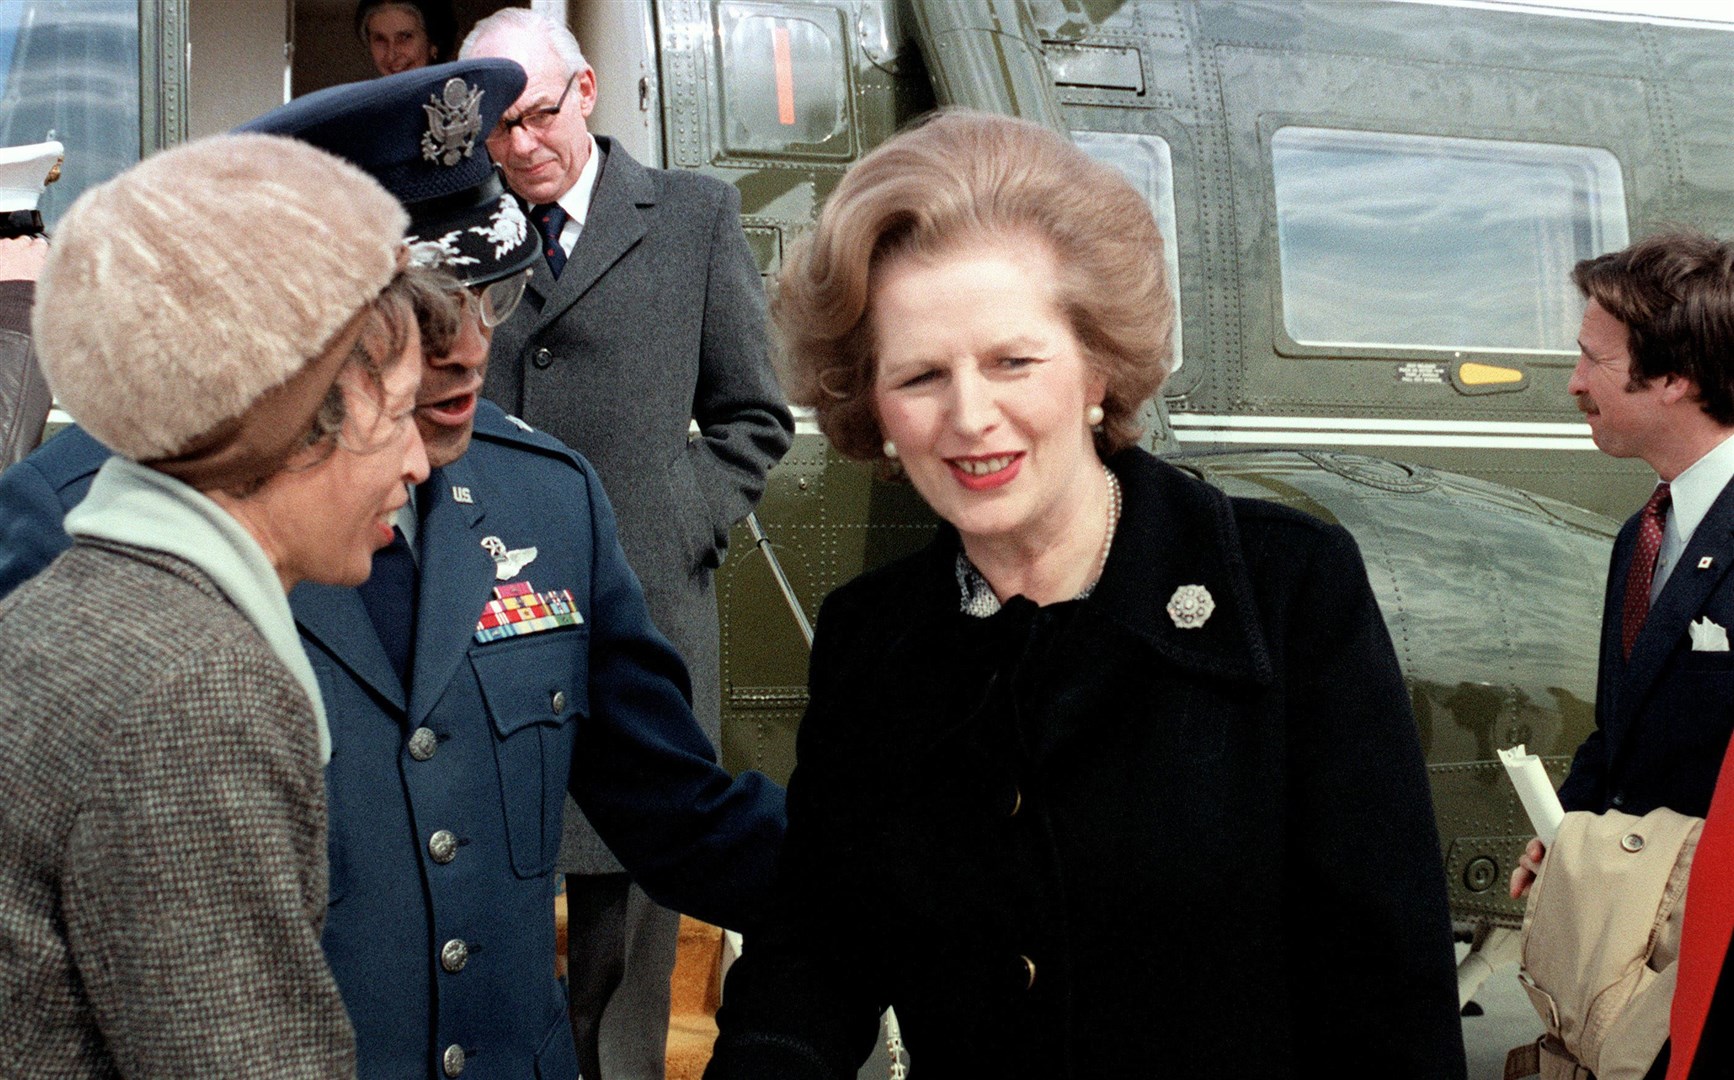 HUMZA YOUSAF SAID: “Starmer praising Thatcher is an insult to those communities in Scotland, and across the UK, who still bear the scars of her disastrous policies.” Picture: Williams, U.S. Military